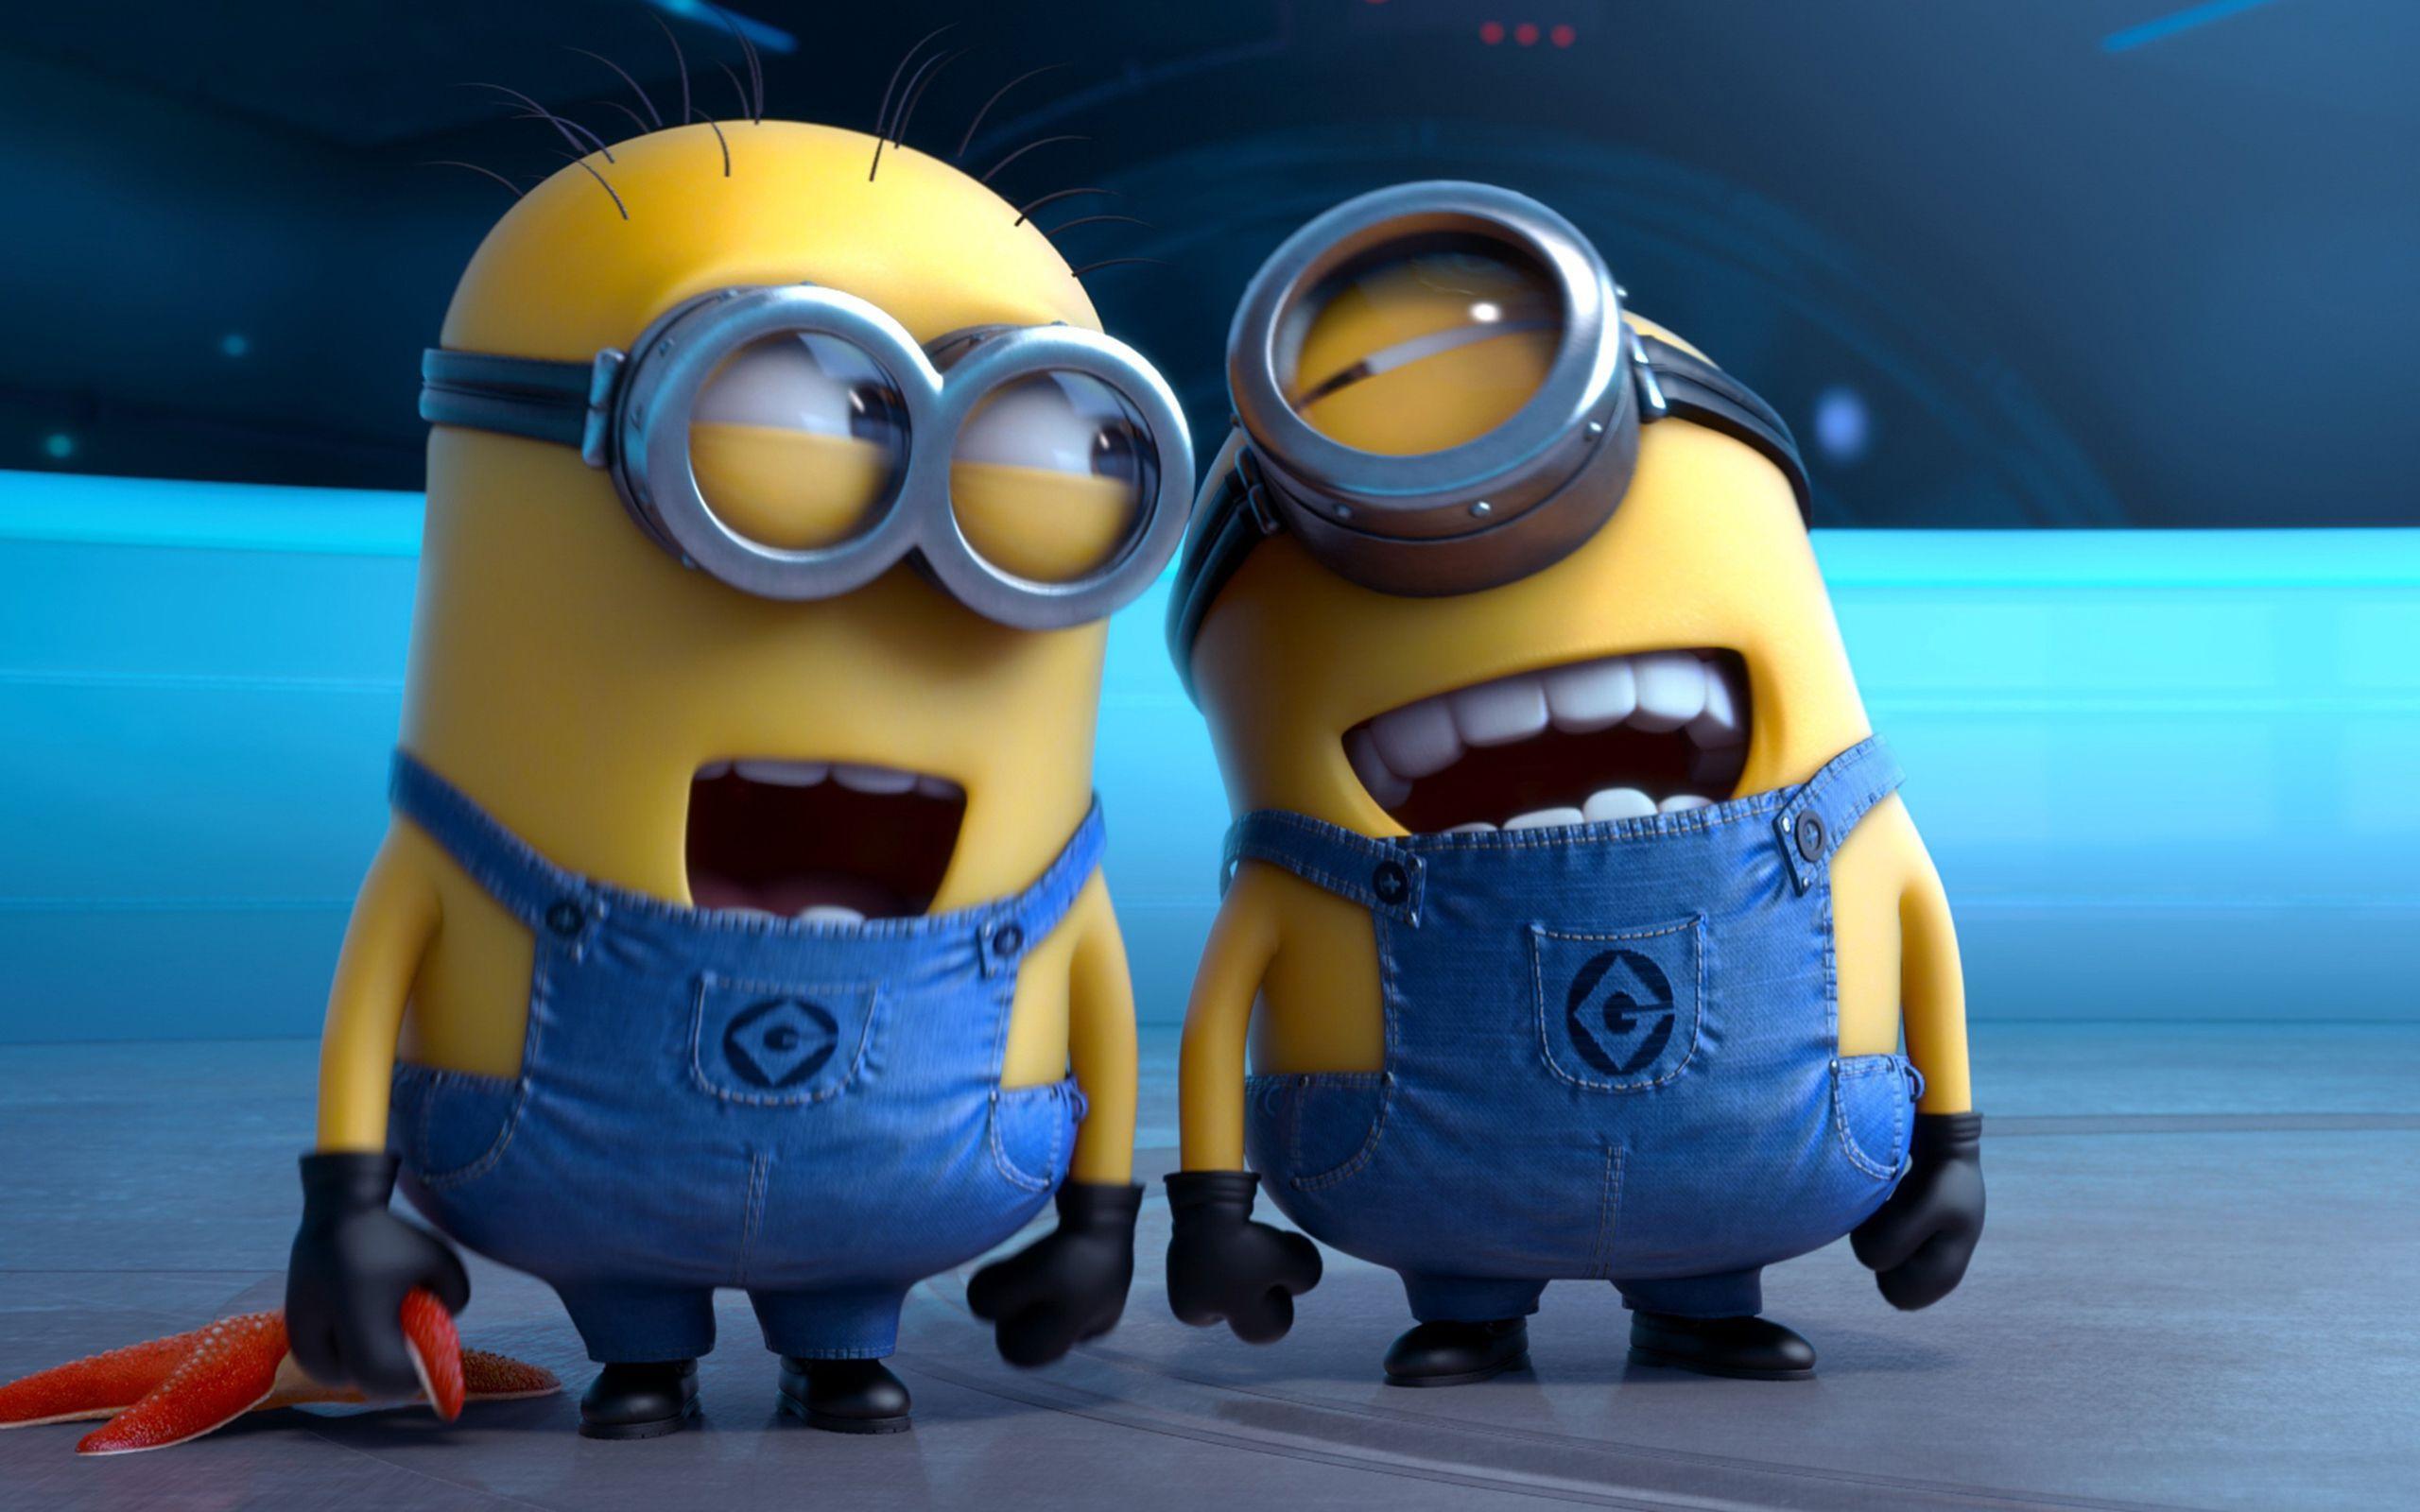 Awesome Despicable Me Wallpaper 29175 2560x1600 px HDWallSource